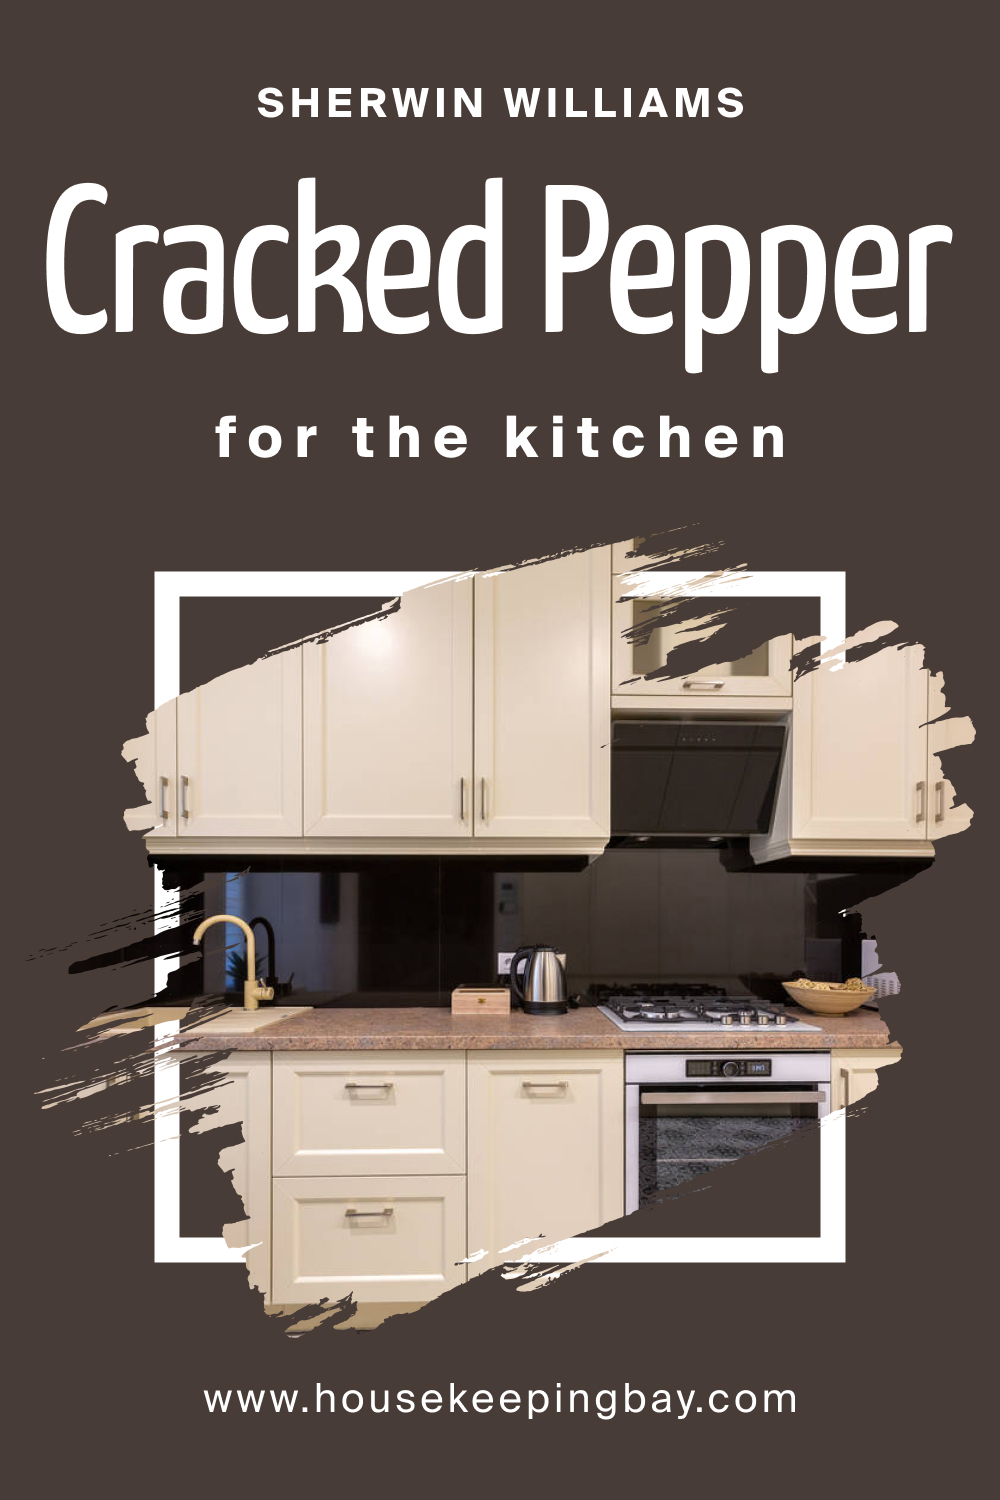 Sherwin Williams. SW 9580 Cracked Pepper For the Kitchens